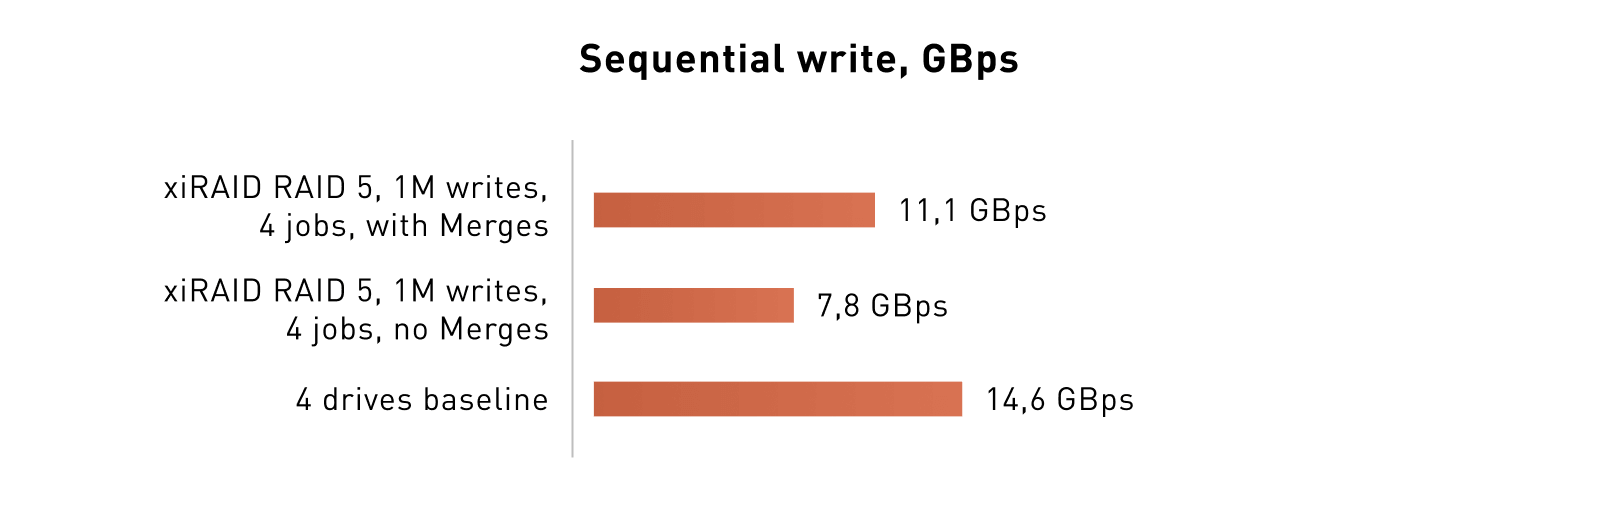 Sequential write xiRAID with Merges vs baseline